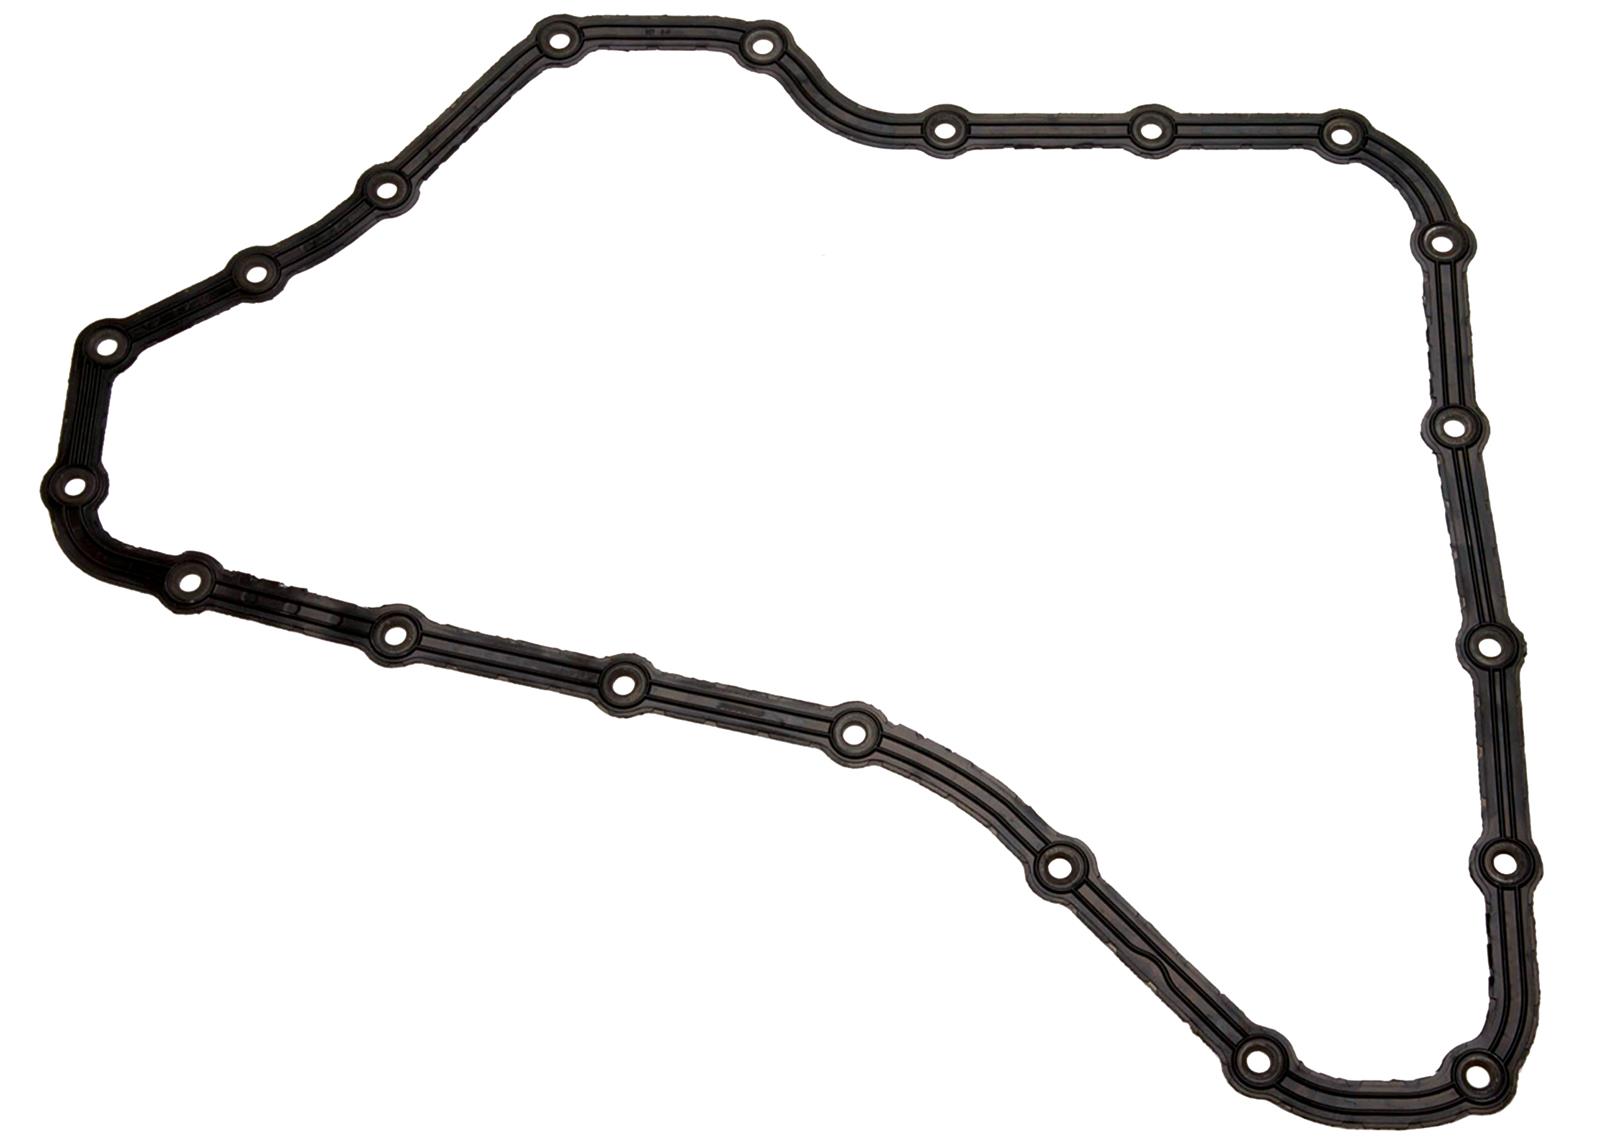 ACDelco 24204624 Auto Trans Pan Gasket